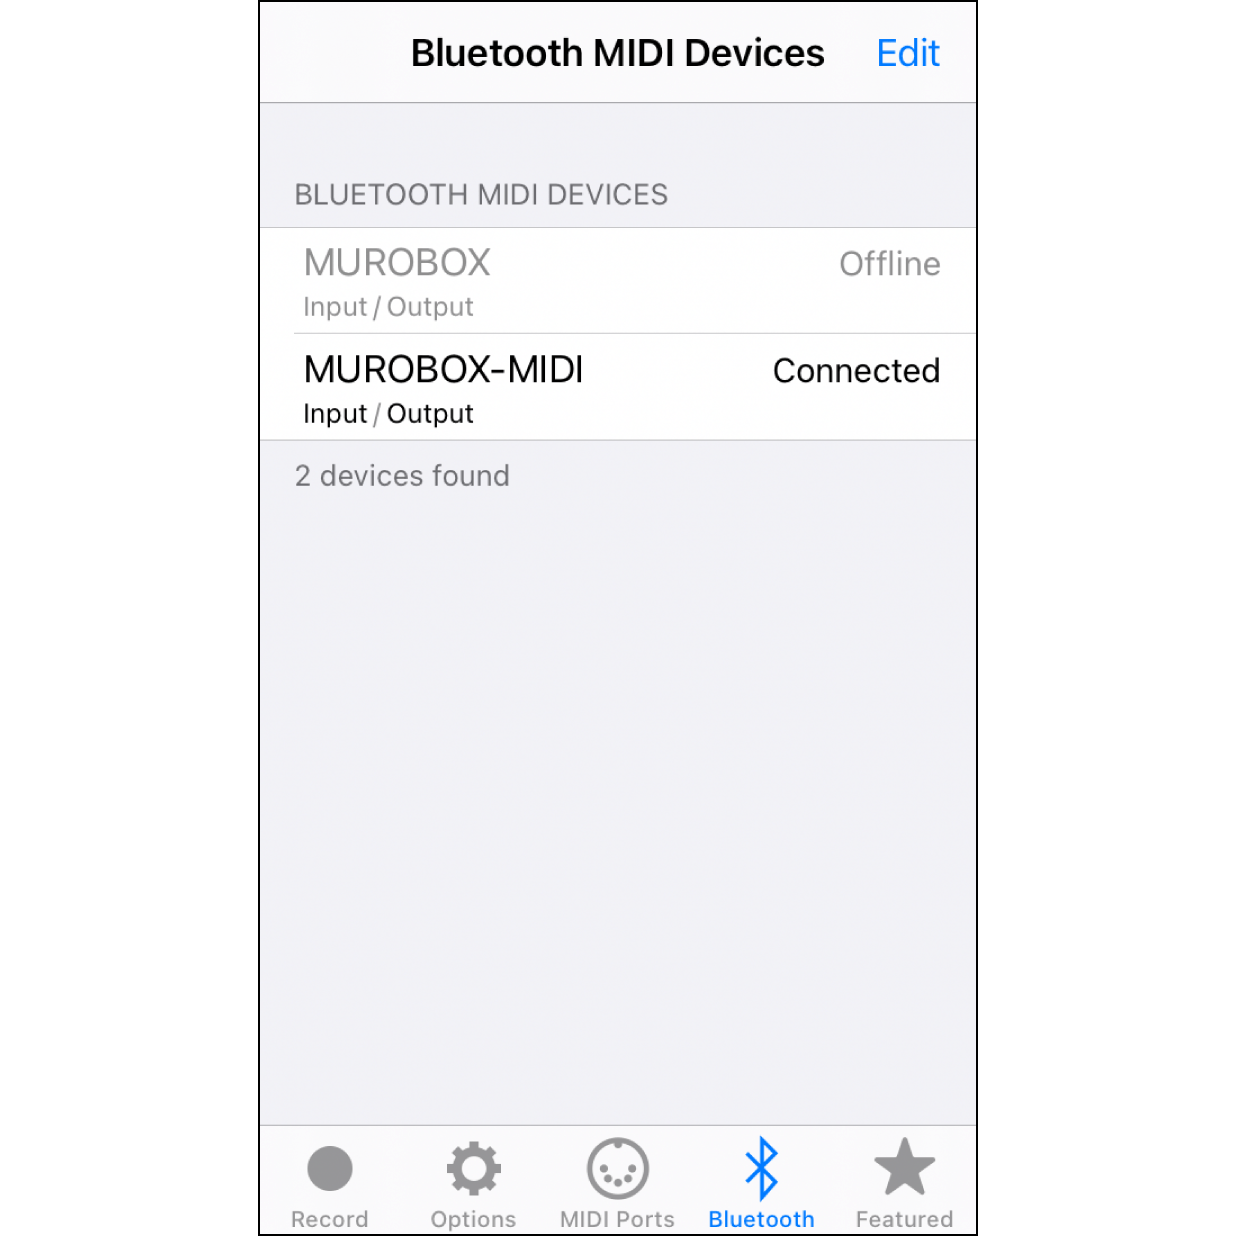 3. Select the MIDI Device“MUROBOX-MIDI” will show up in the list of options. Click this option for a few seconds, until its status shows as "Connected”.